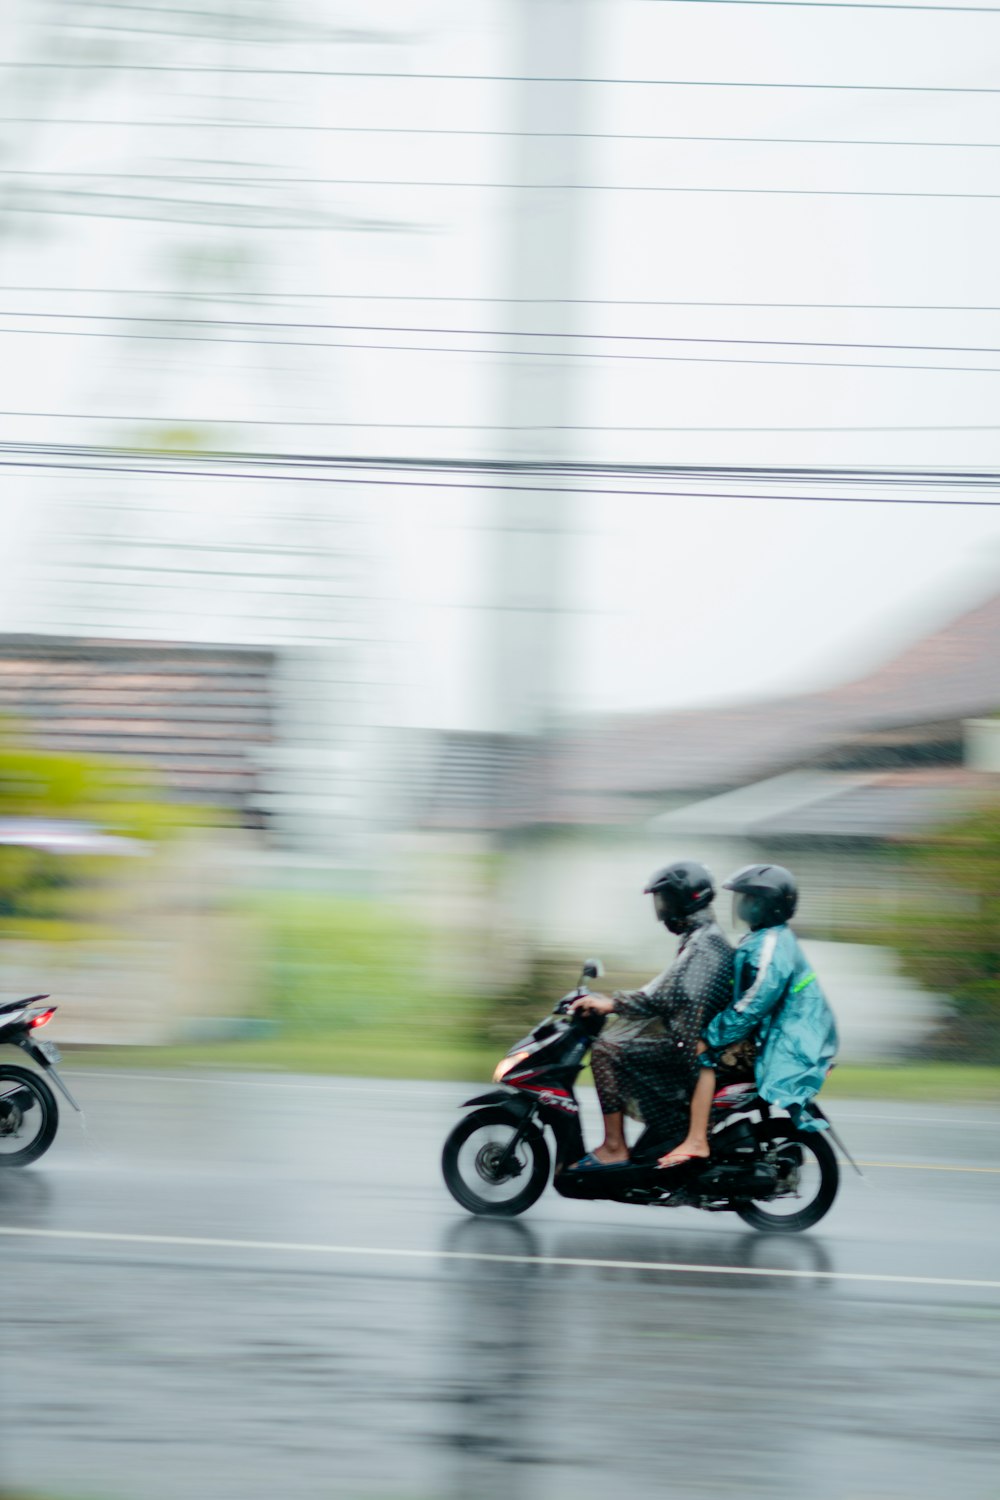 man and woman riding motorcycle on road during daytime